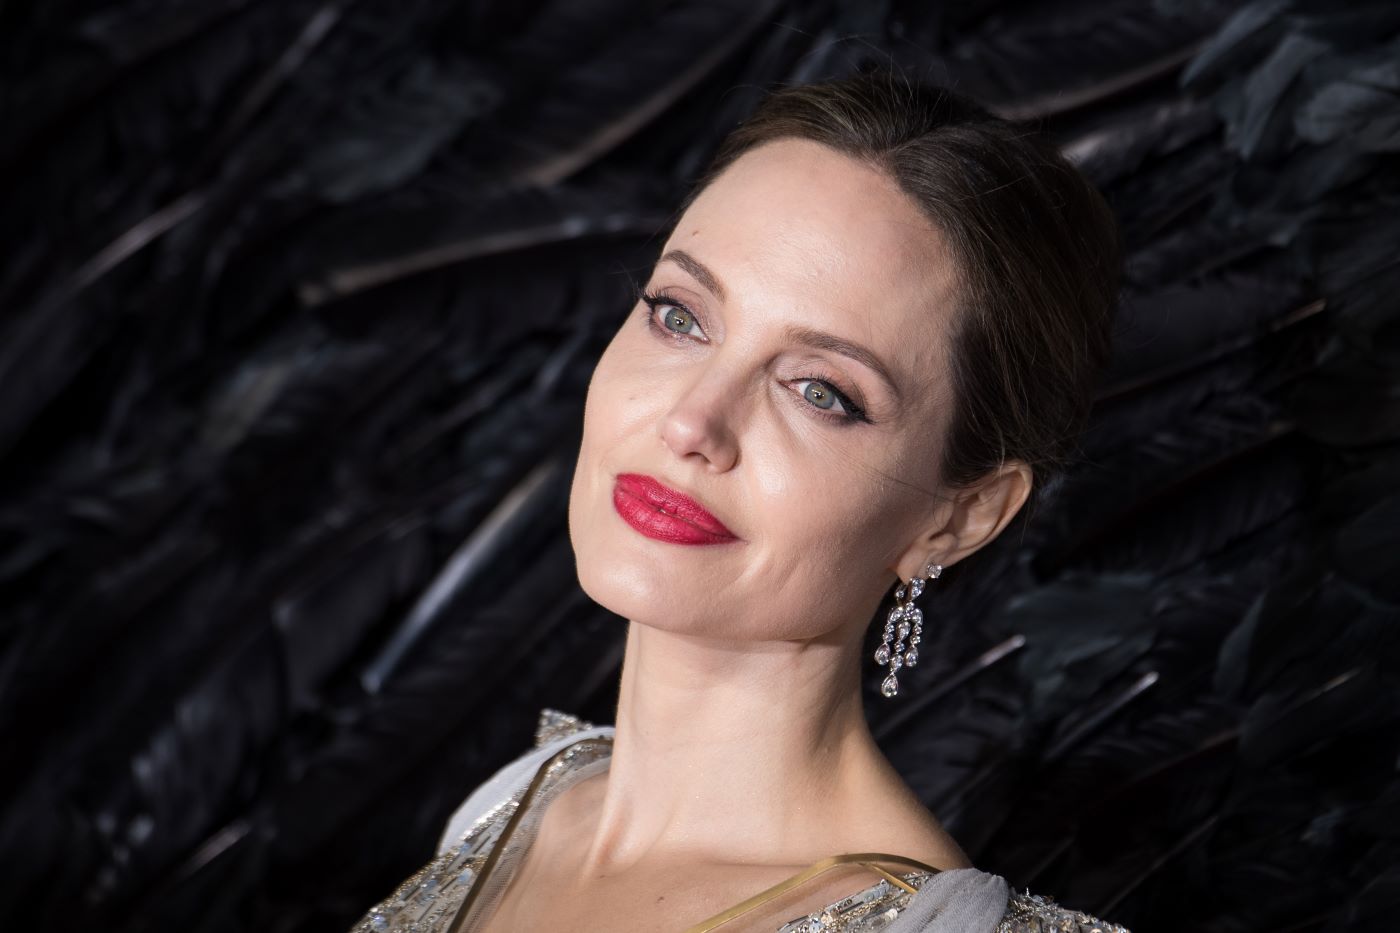 Angelina Jolie in a silver and gold top in front of a background of black feathers.